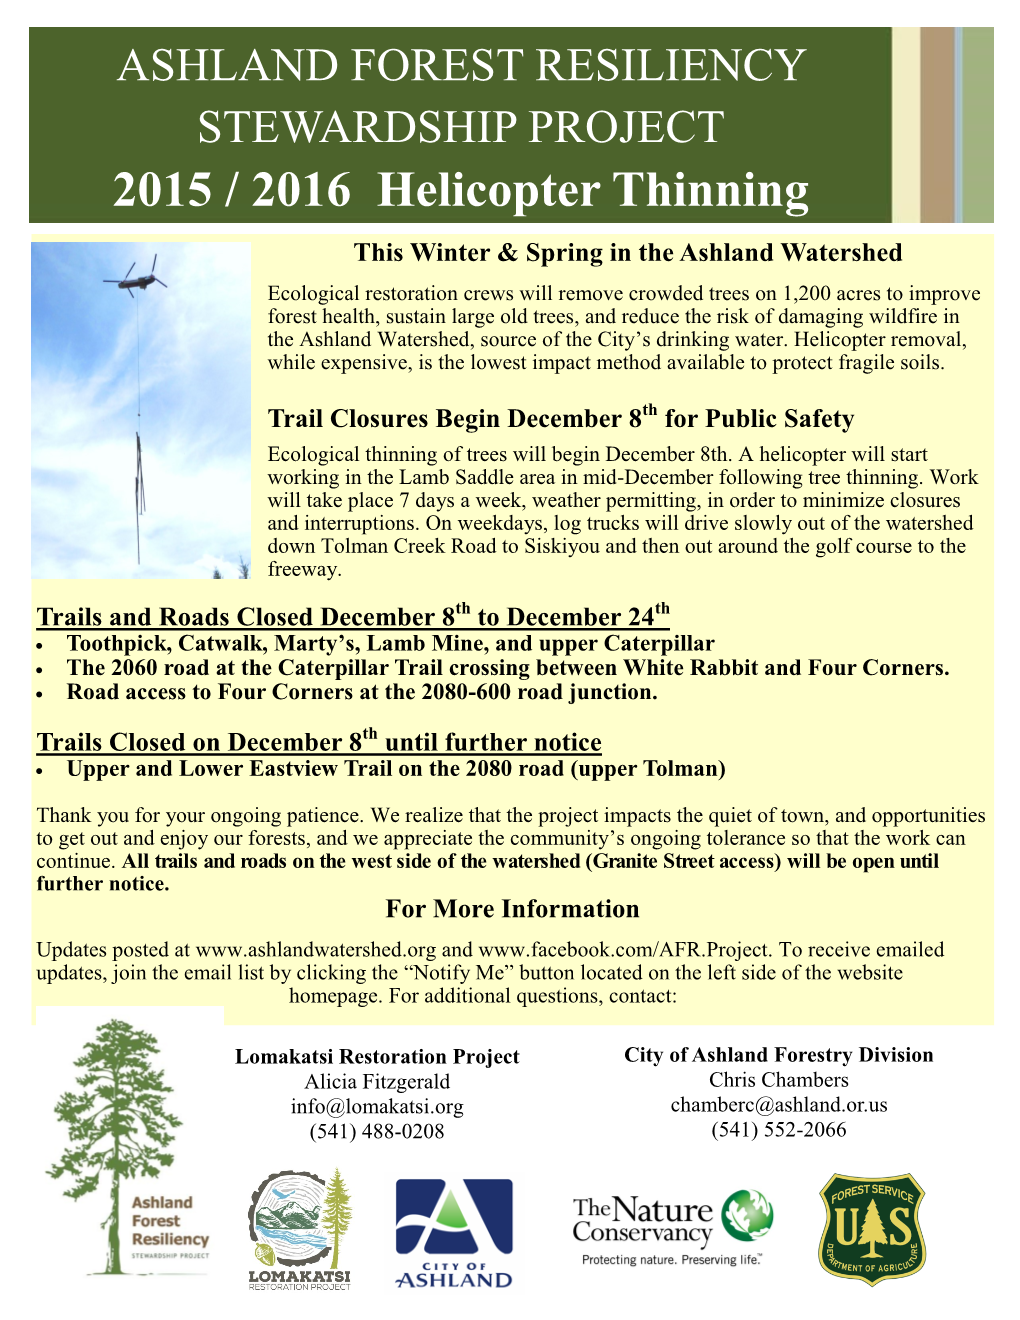 2015 / 2016 Helicopter Thinning